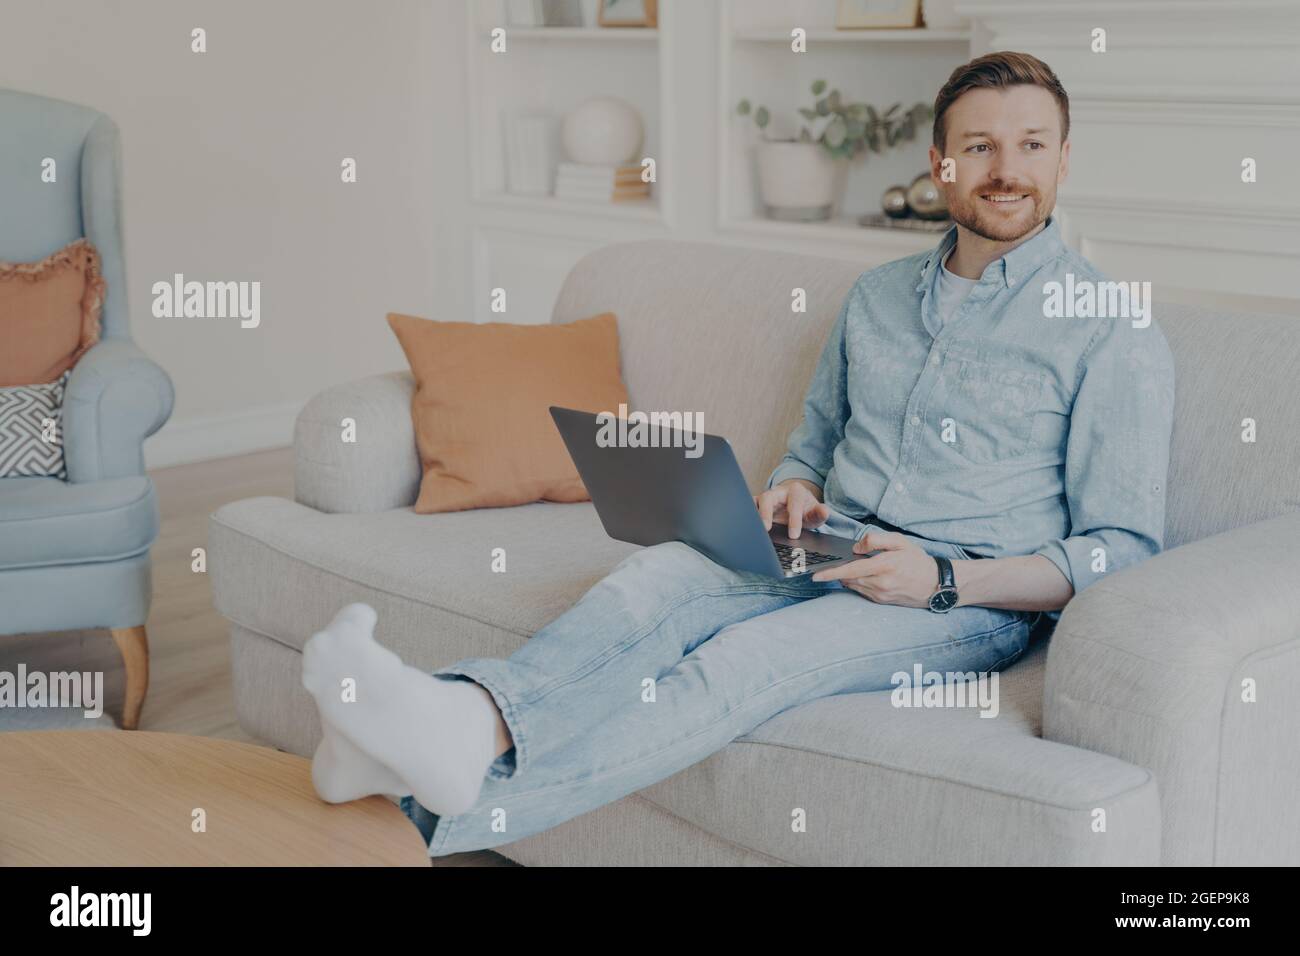 Relaxed young man surfing web while sitting on couch Stock Photo